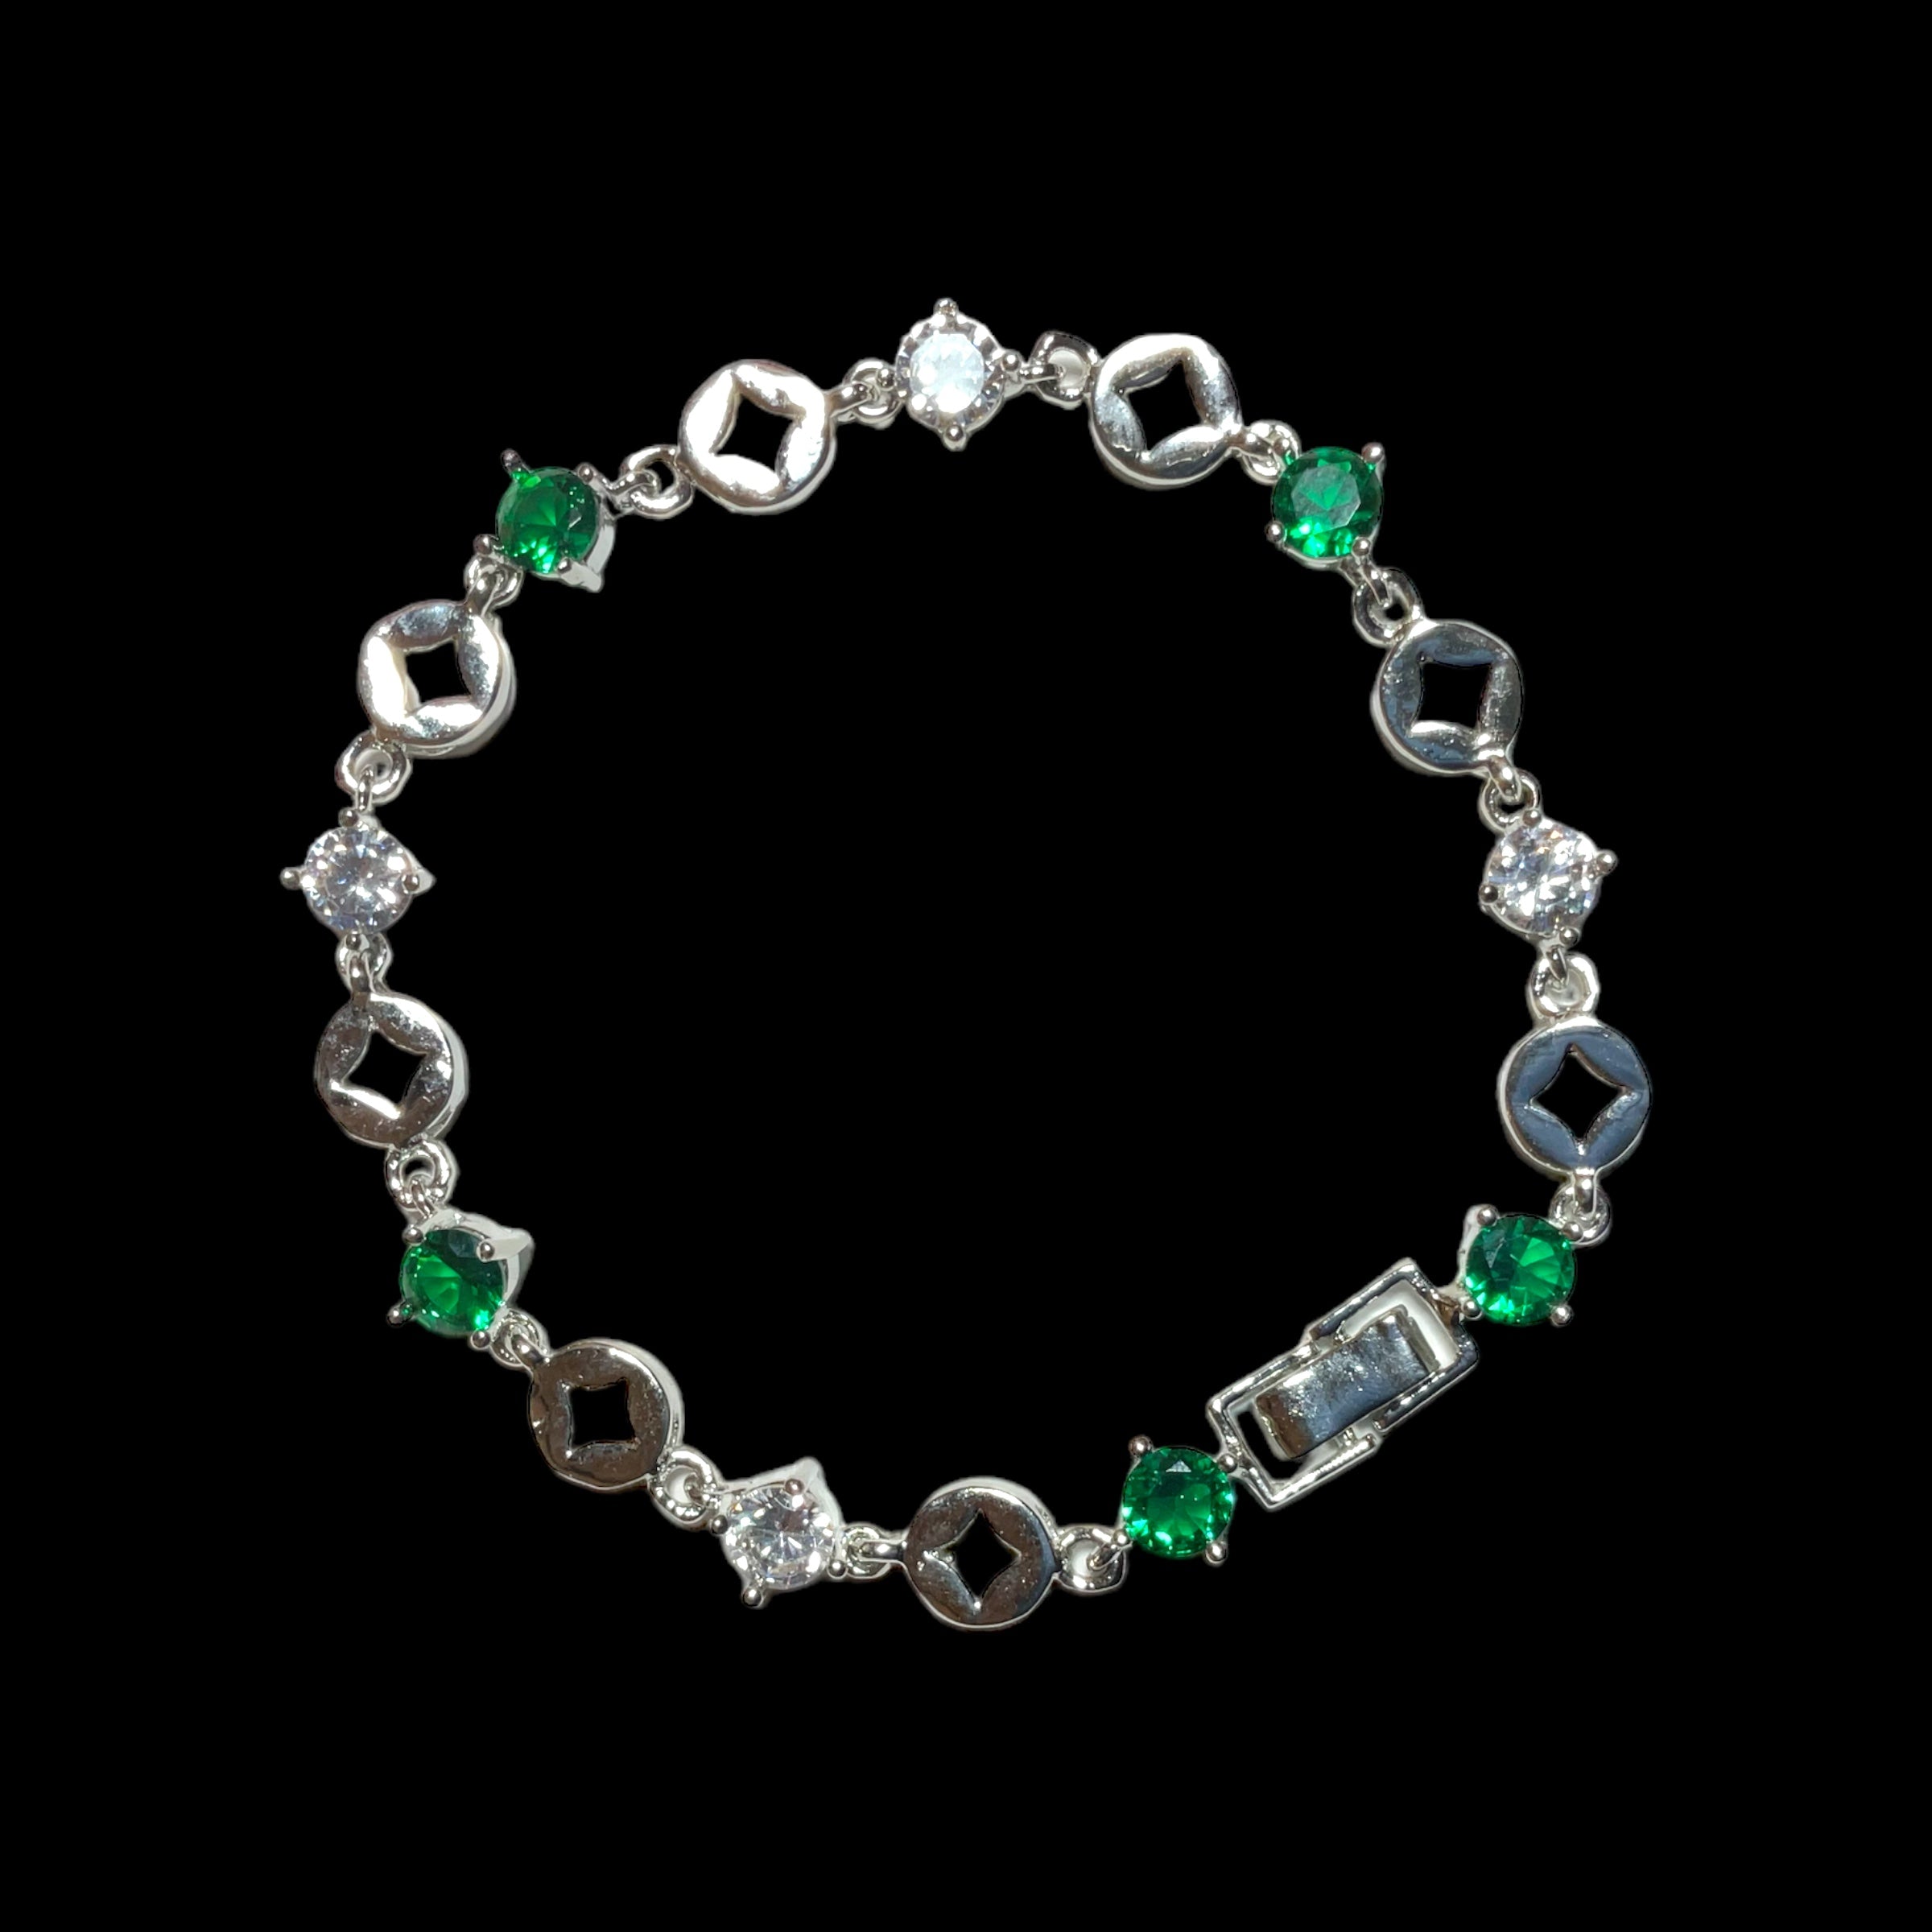 a bracelet with green and white stones on a black background